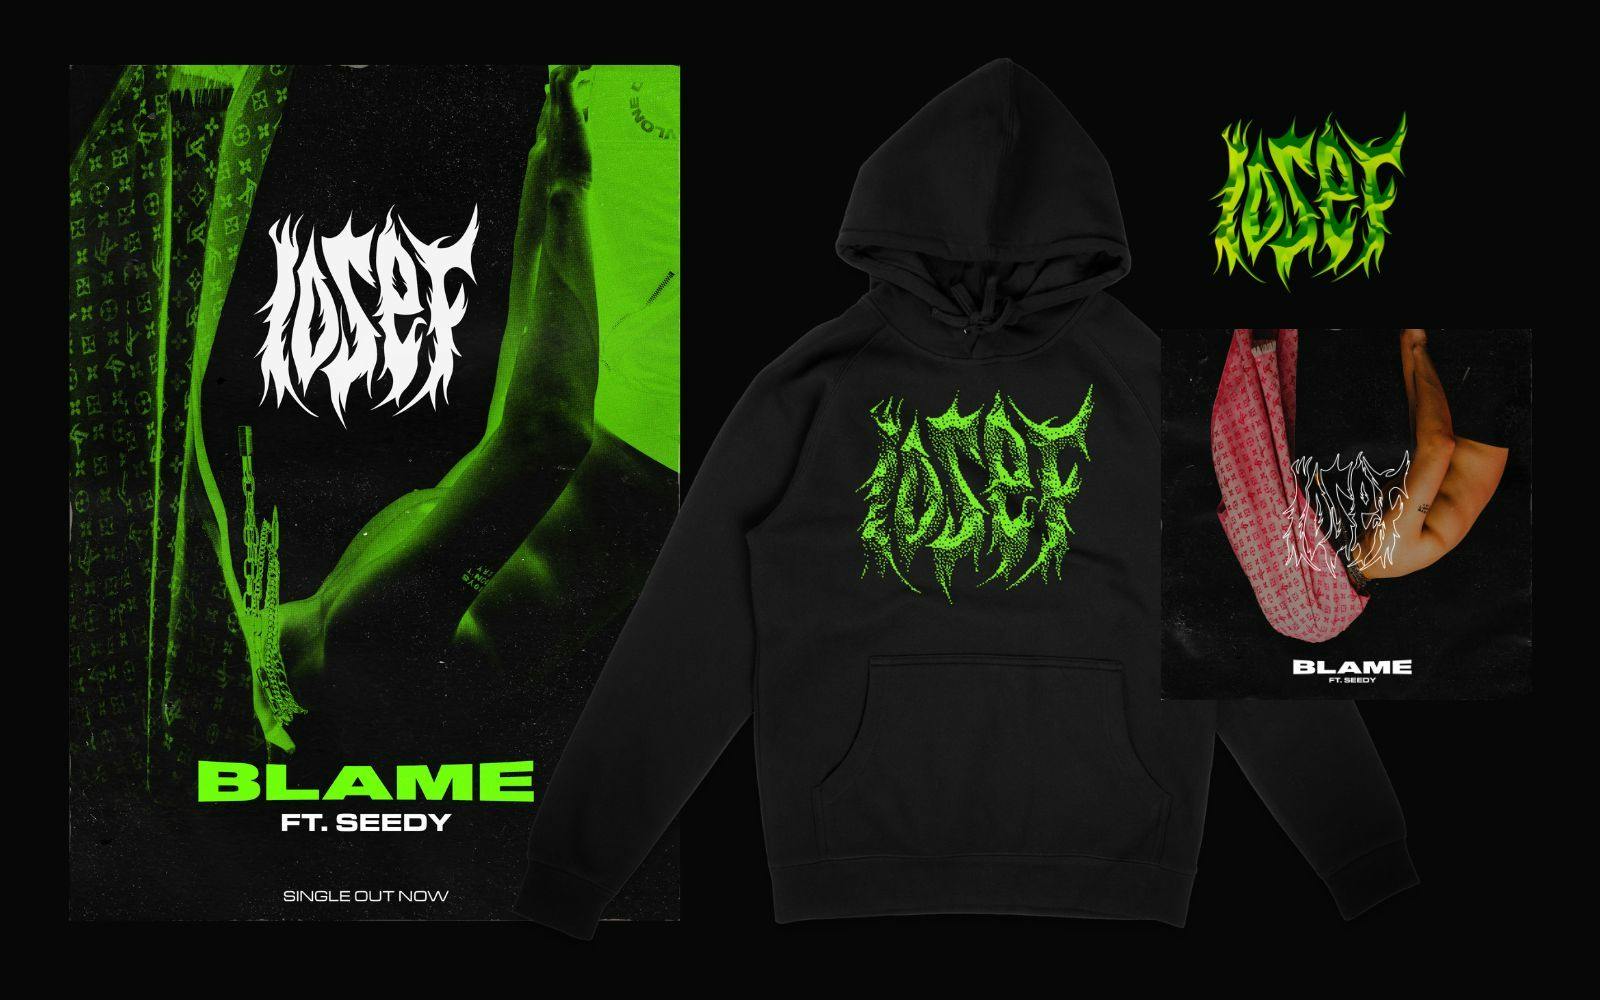 Merch from singer iosef with his name written on a hoodie in green